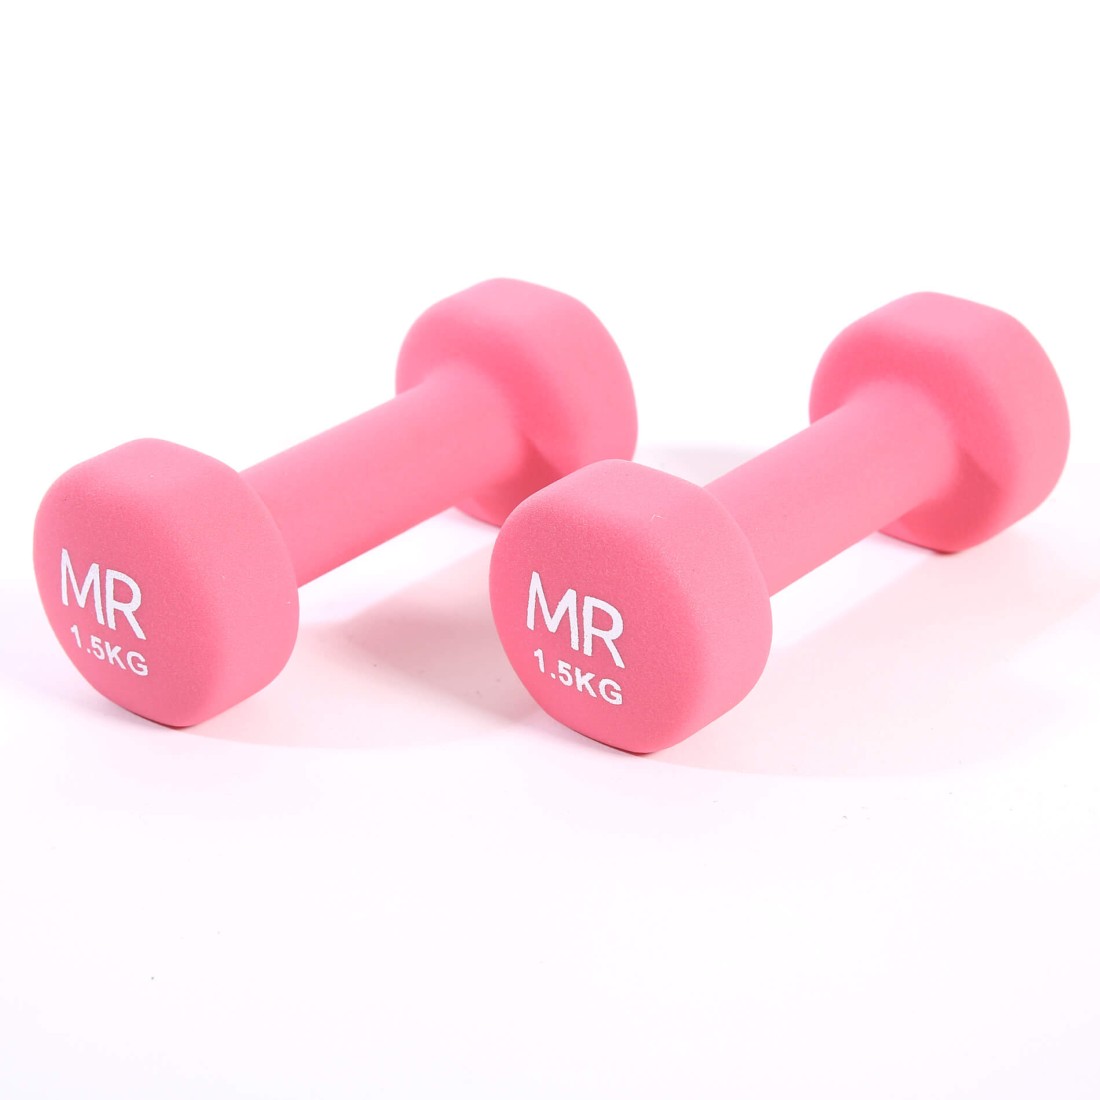 Dumbbells of various colors and weights for muscle training